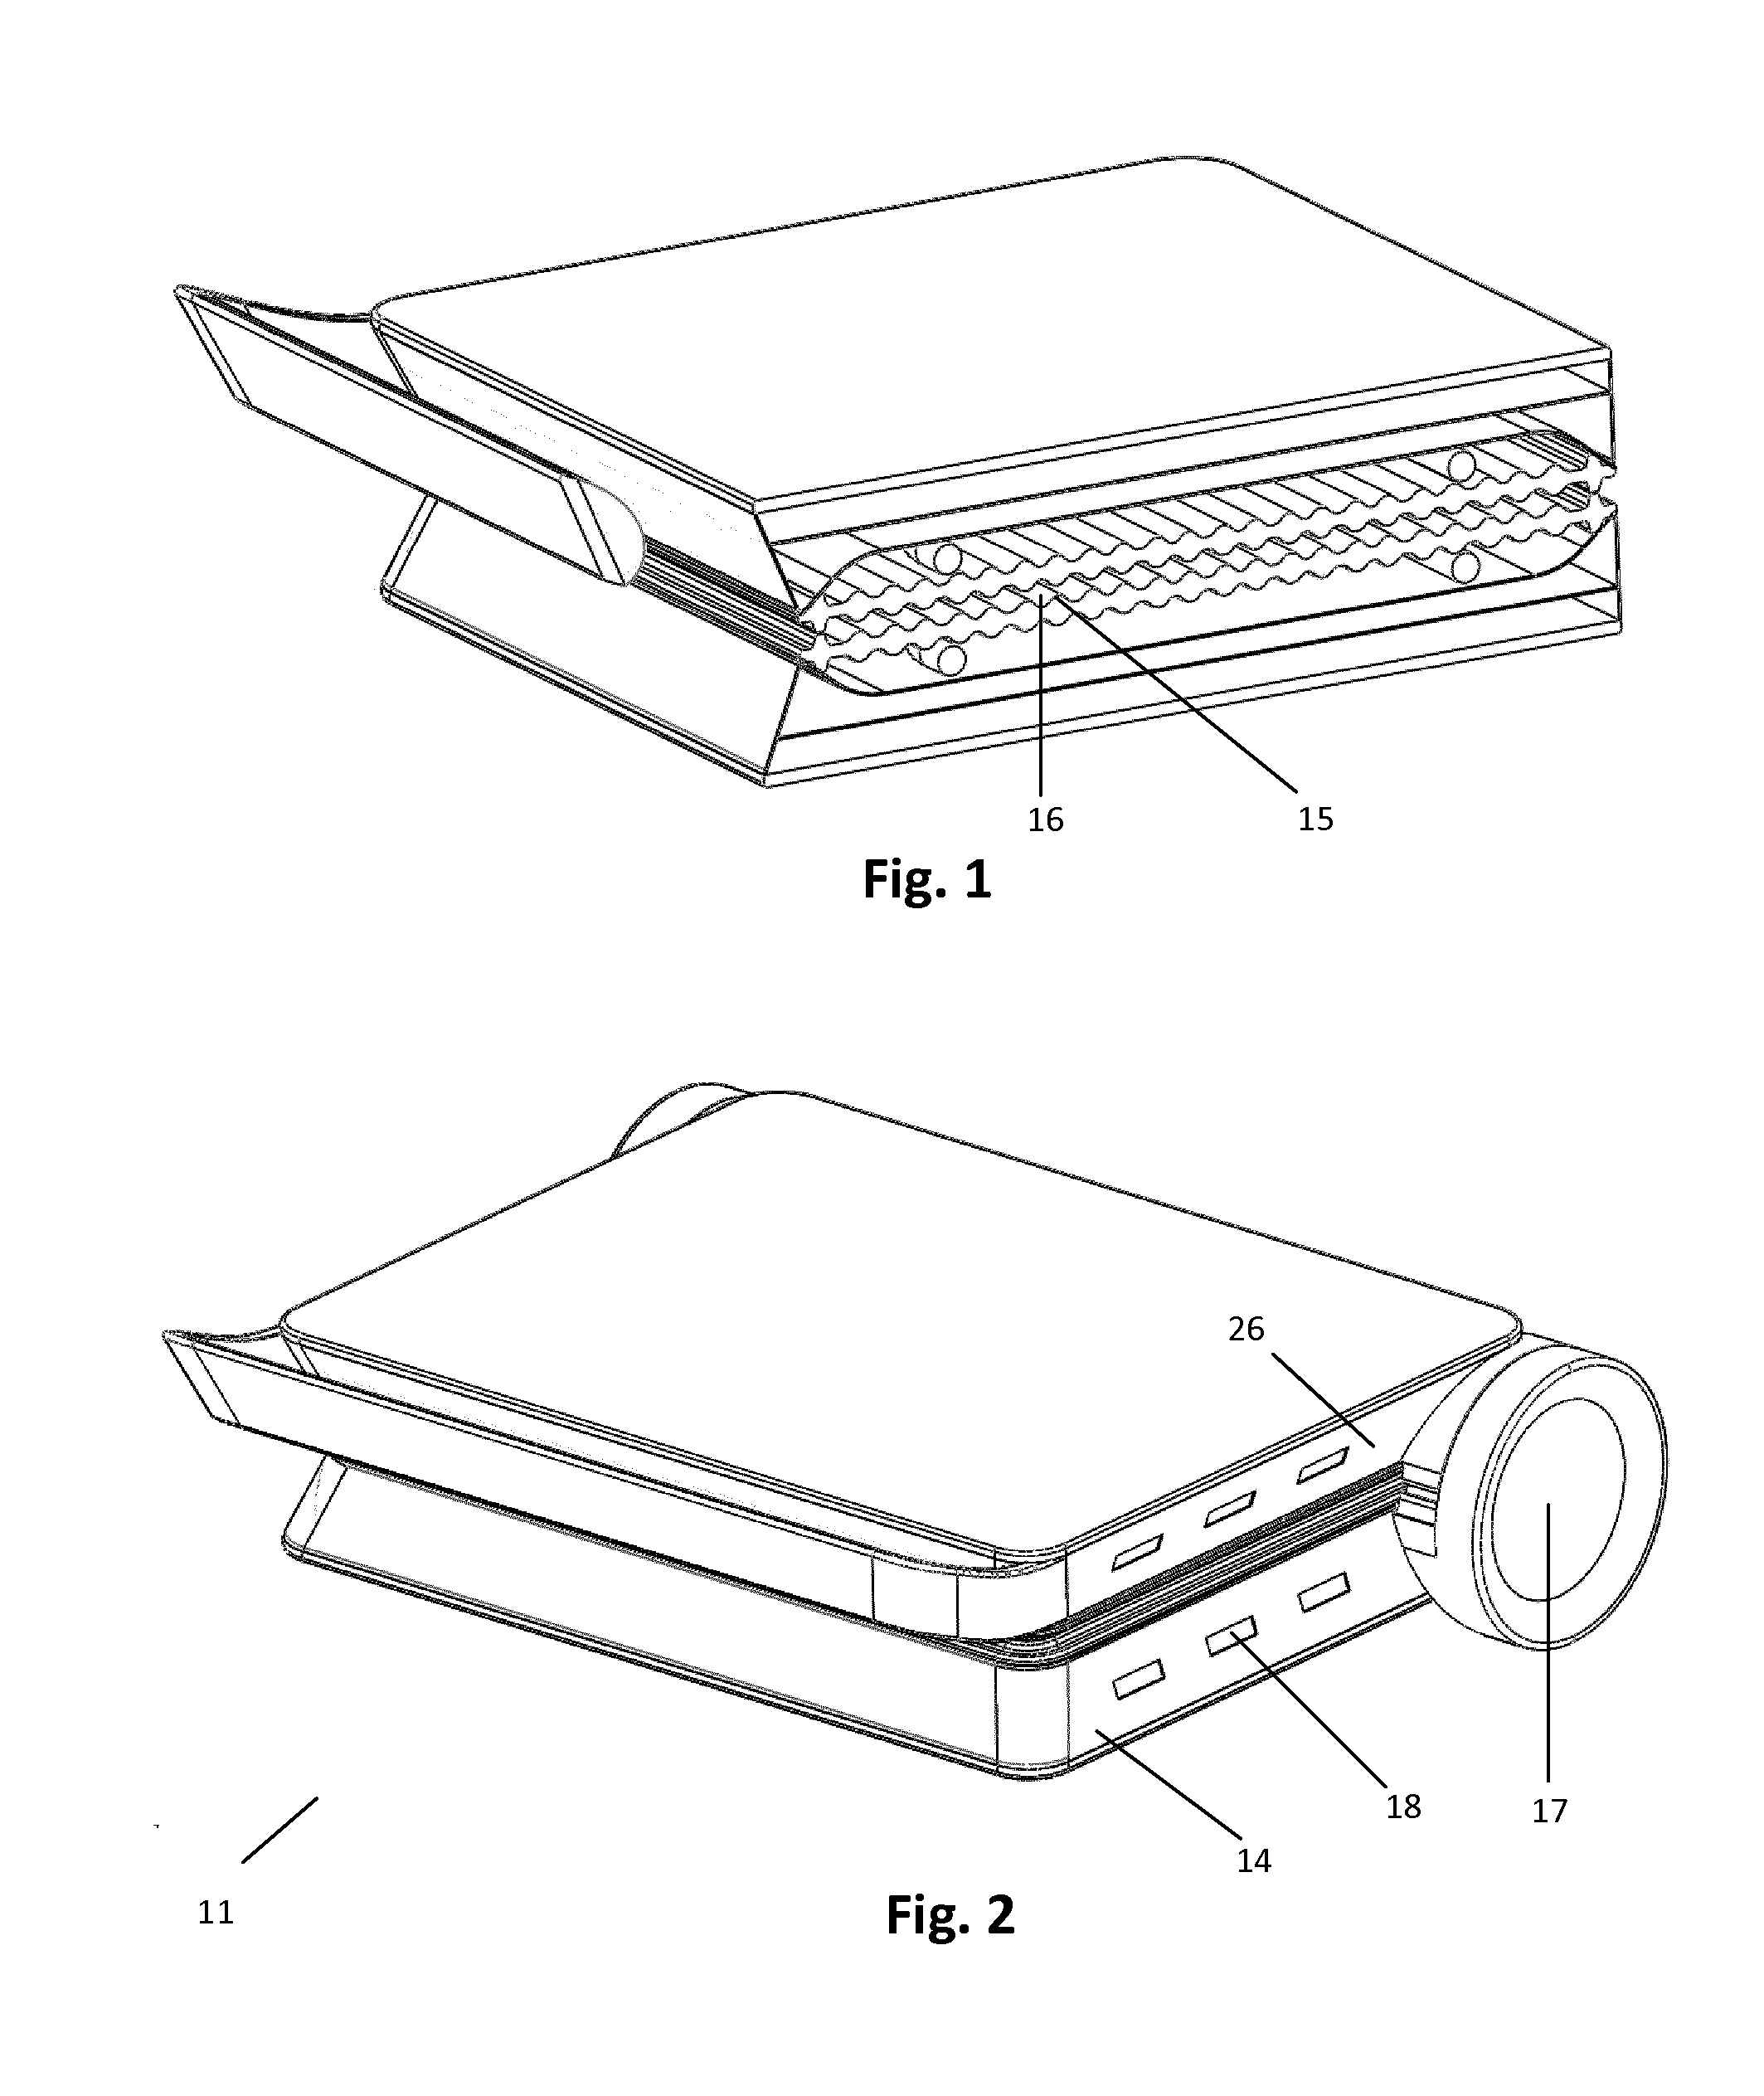 Toasting Apparatus Having Improved Hot Chamber Isolation With Passive Ventilation